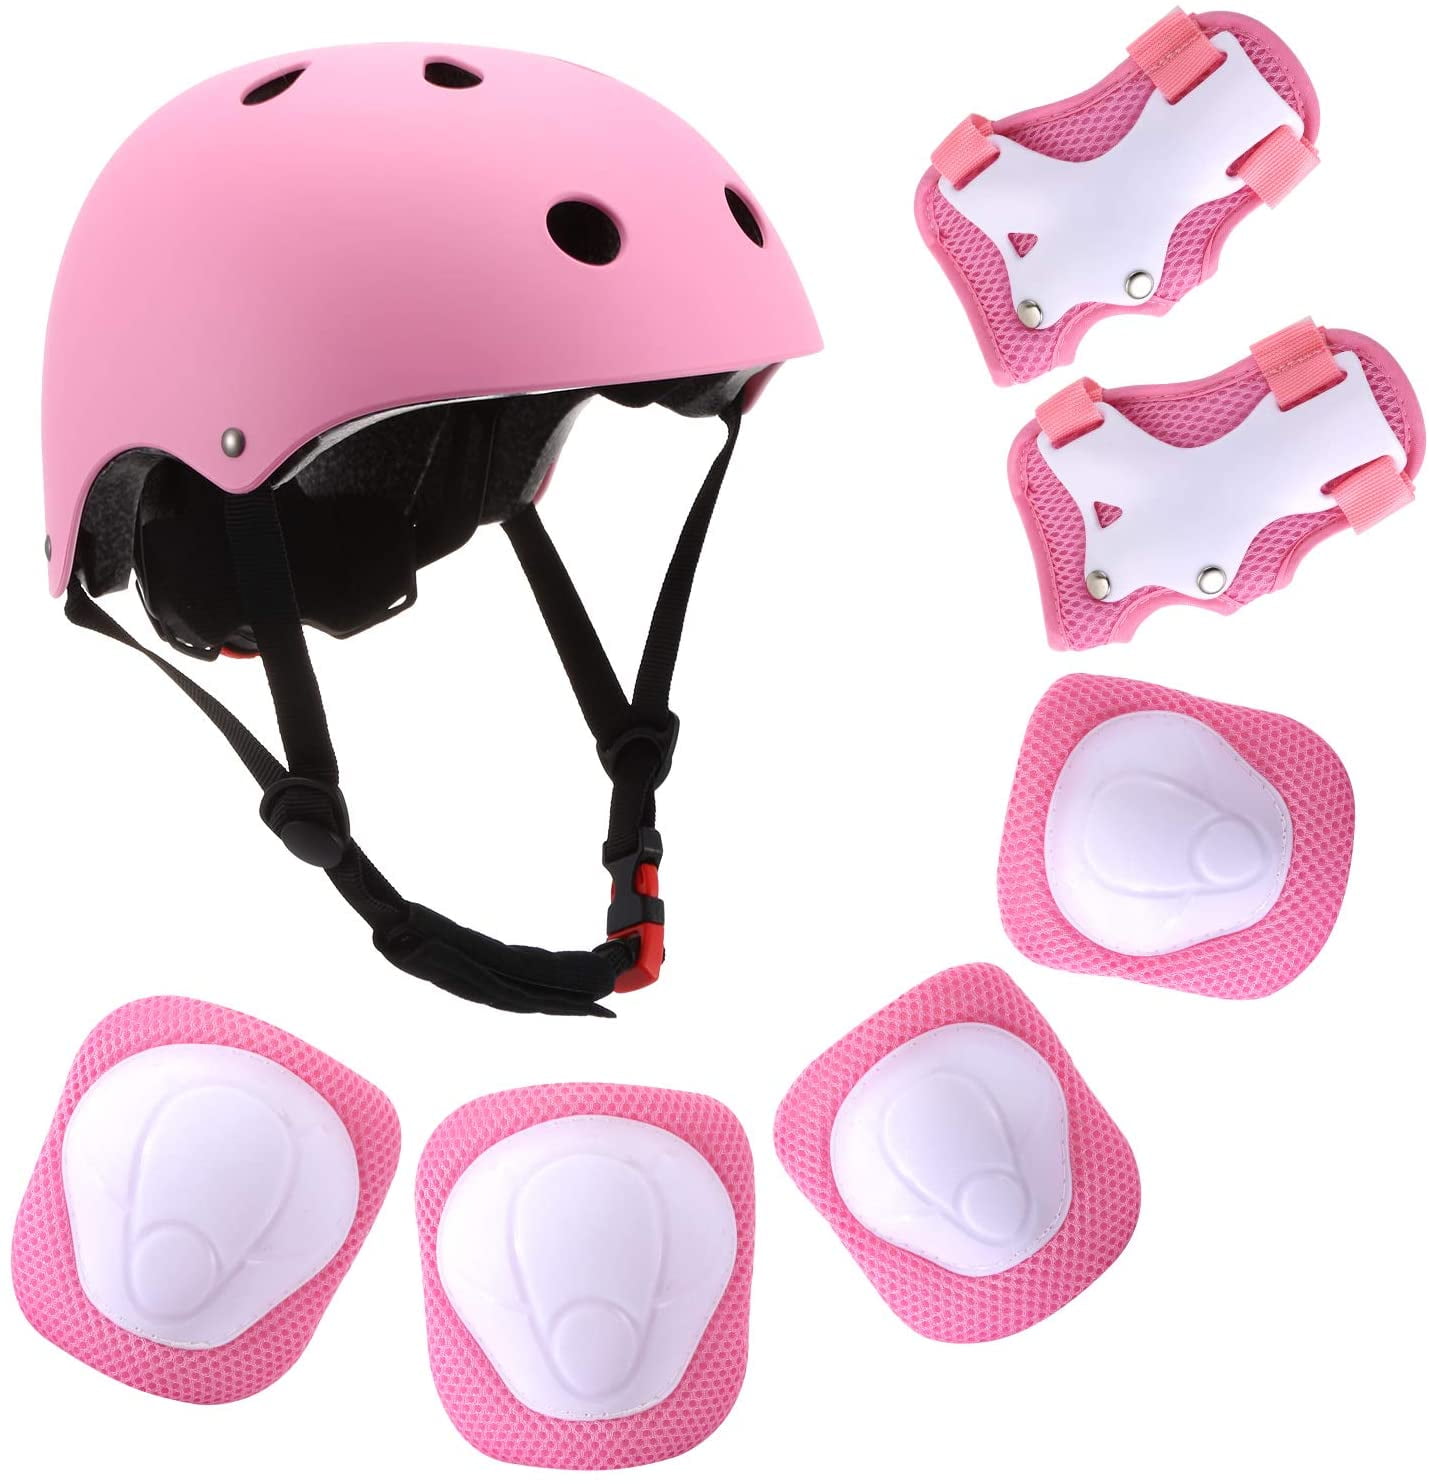 ALXiiii Adjustable Kids/Adult Bike Helmet,Safety Multi-Sport CPSC Certificated Cycling Helmet with Removable Liner,for Longboard,Roller Skate,Cyling,Scooter 